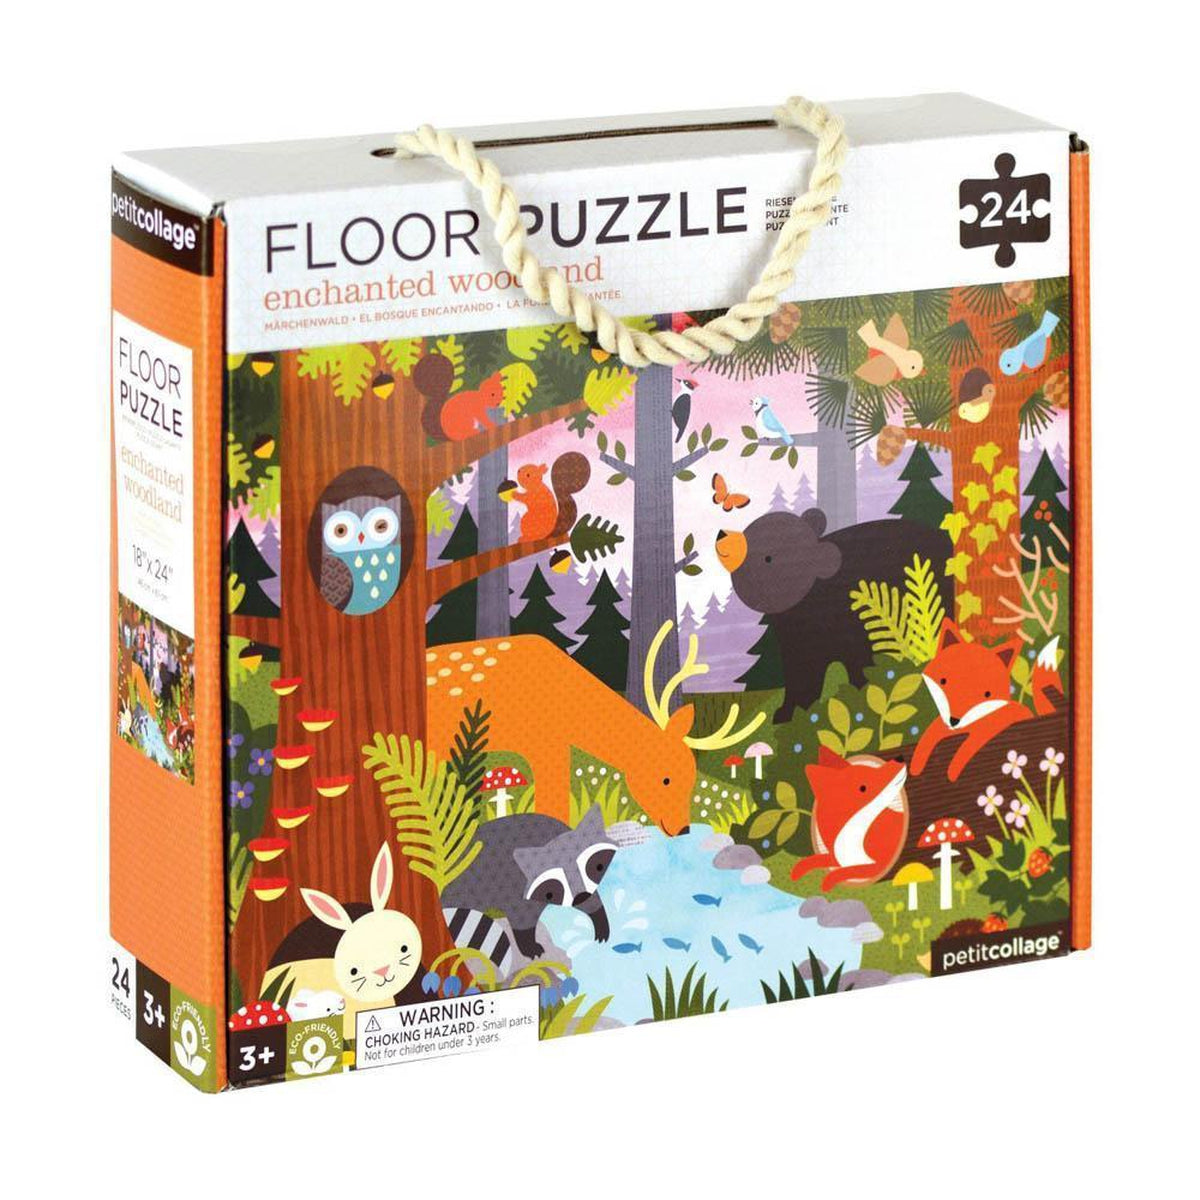 Petit Collage enchanted woodlands floor puzzle-puzzles-Petit Collage-Dilly Dally Kids